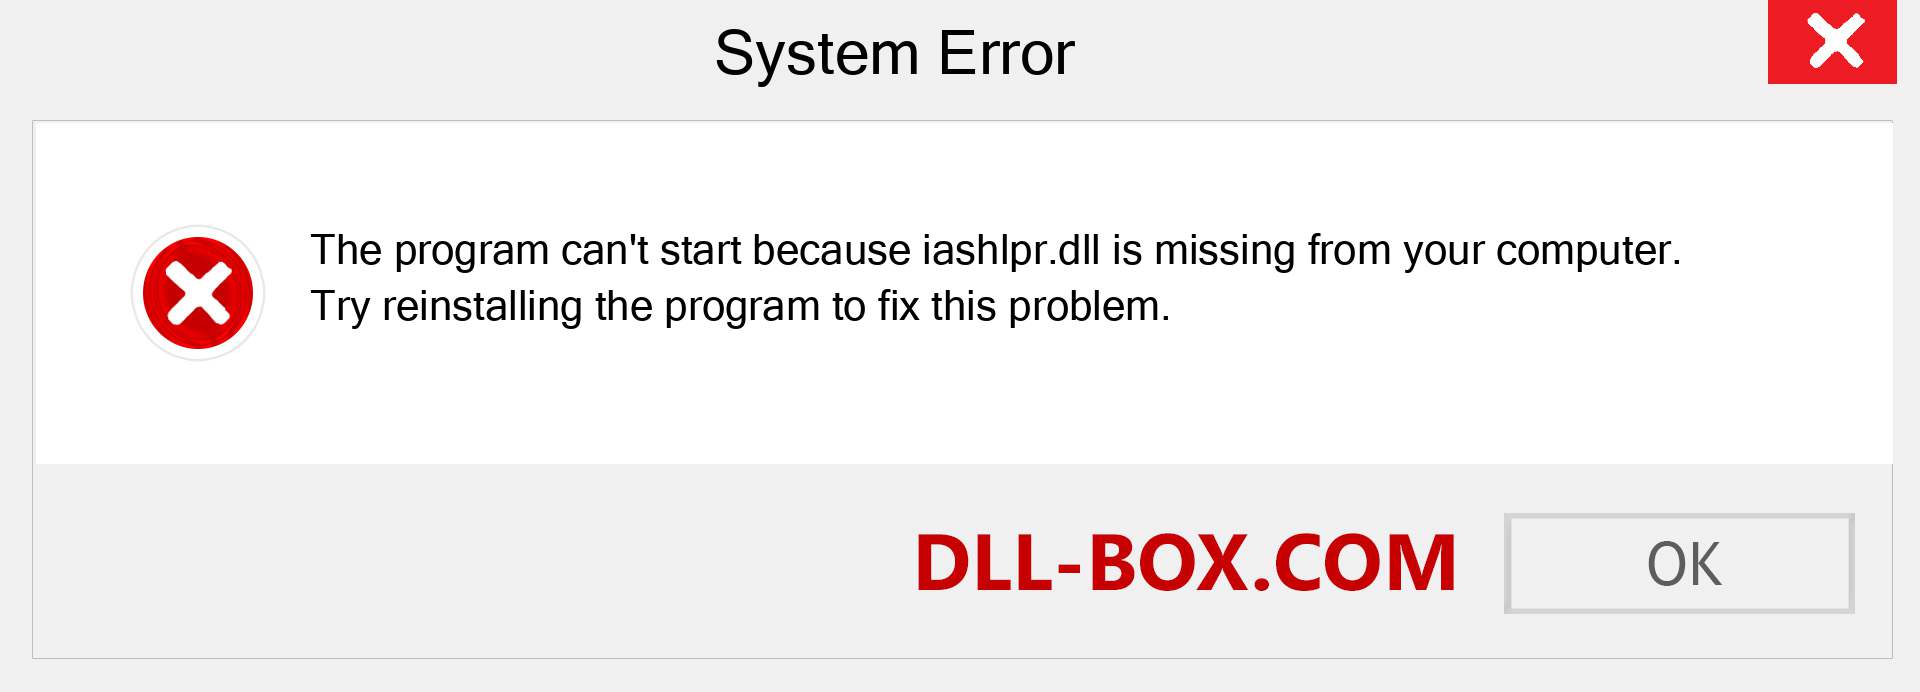  iashlpr.dll file is missing?. Download for Windows 7, 8, 10 - Fix  iashlpr dll Missing Error on Windows, photos, images